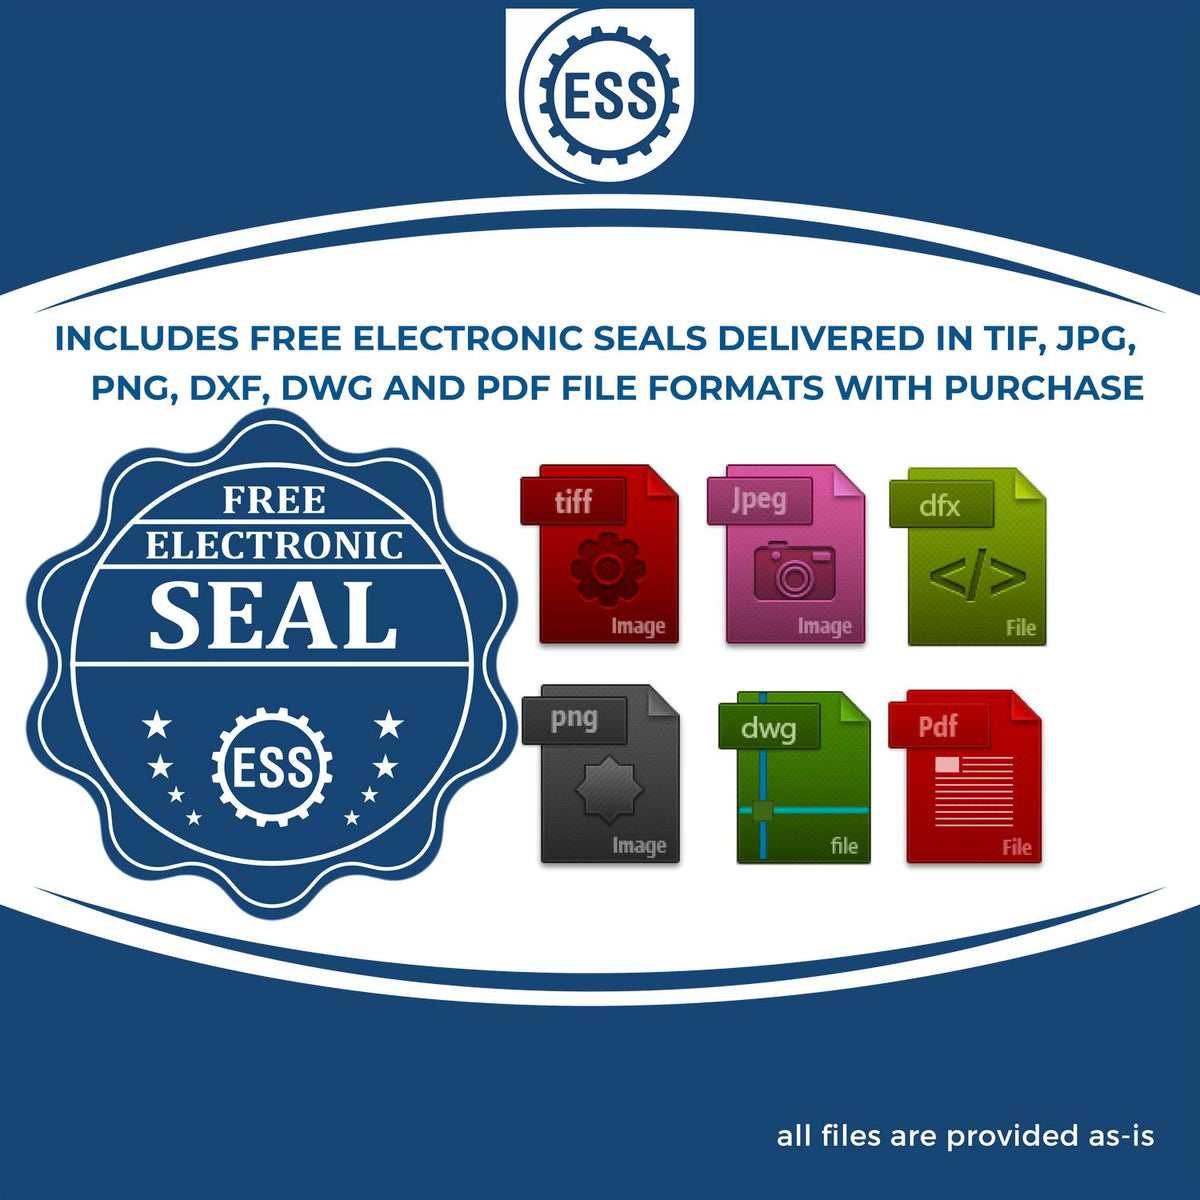 An infographic for the free electronic seal for the Slim Pre-Inked Michigan Professional Geologist Seal Stamp illustrating the different file type icons such as DXF, DWG, TIF, JPG and PNG.